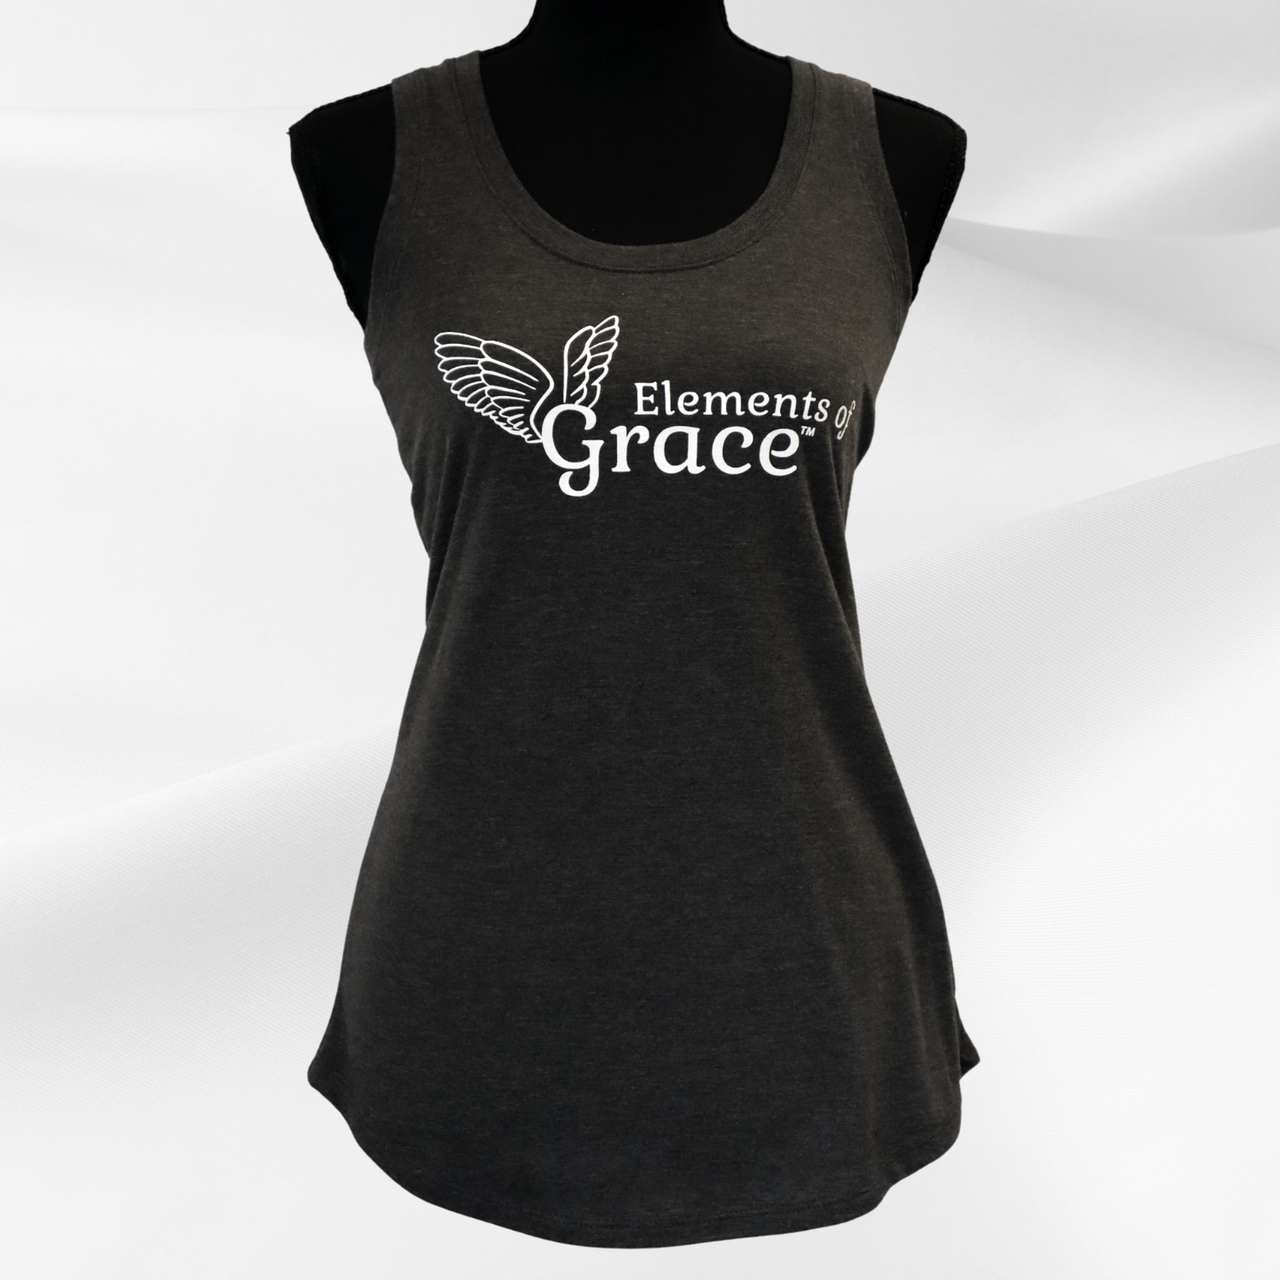 Don't Get in the Way of HOPE!™ Ladies' Racerback Tank by Elements of Grace